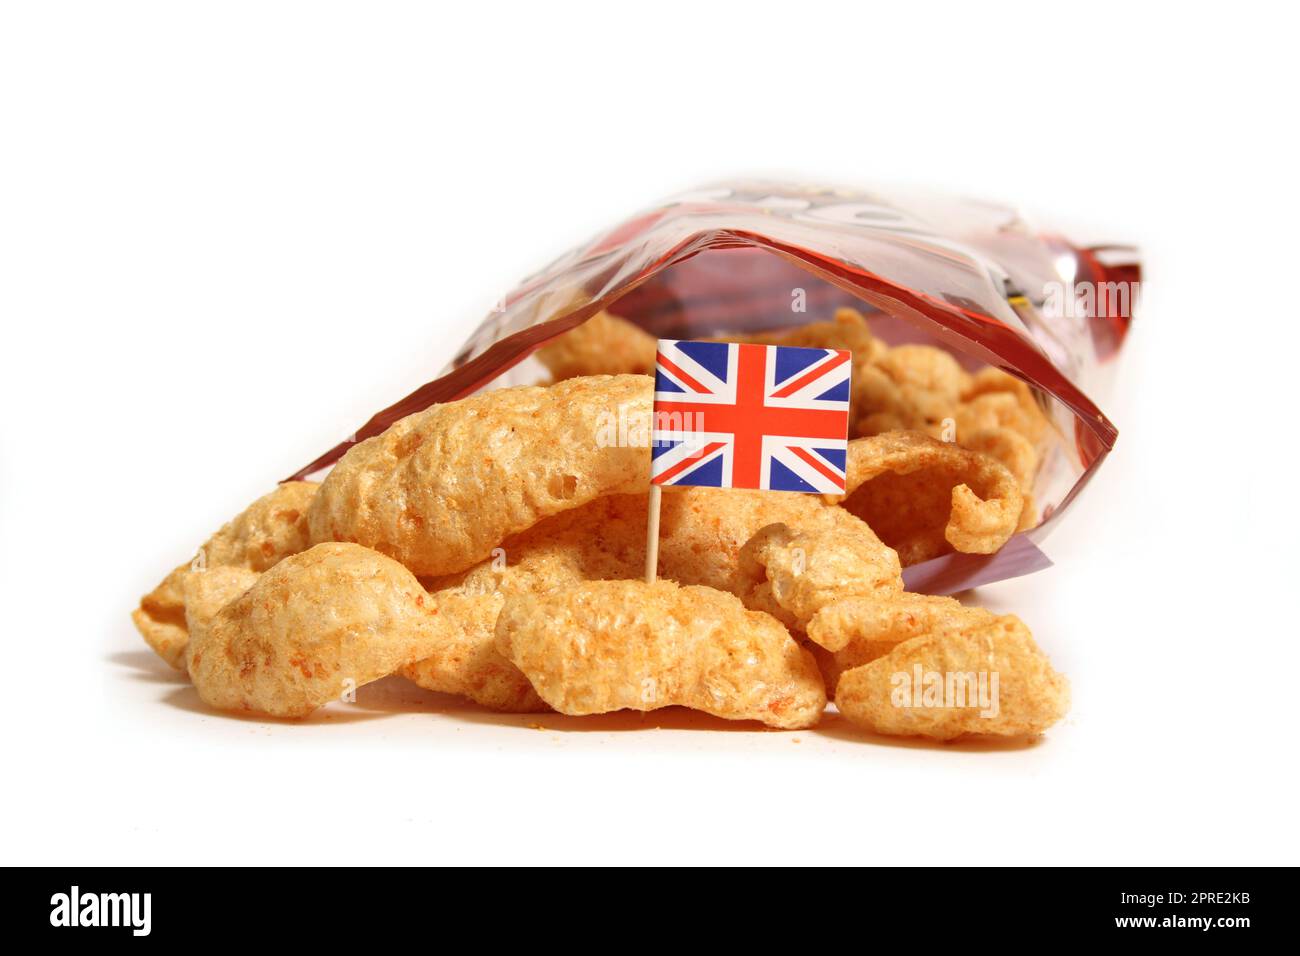 Open Bag of Fried Pork Skins With Flag of England Stock Photo